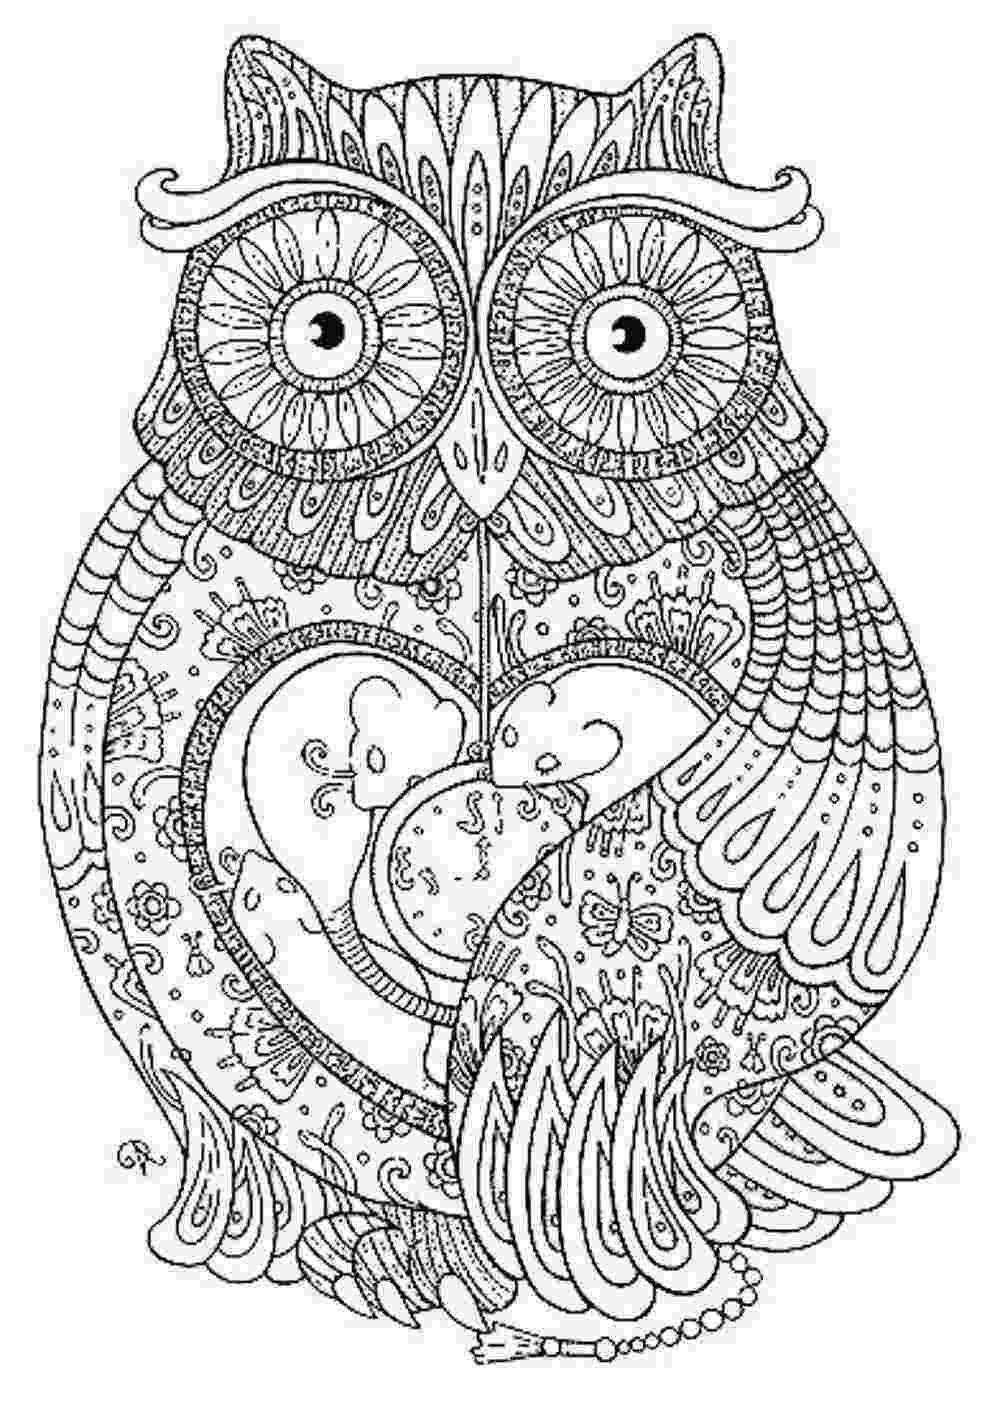 coloring book for grown ups free download get this printable doodle art coloring pages for grown ups ups download coloring free book grown for 